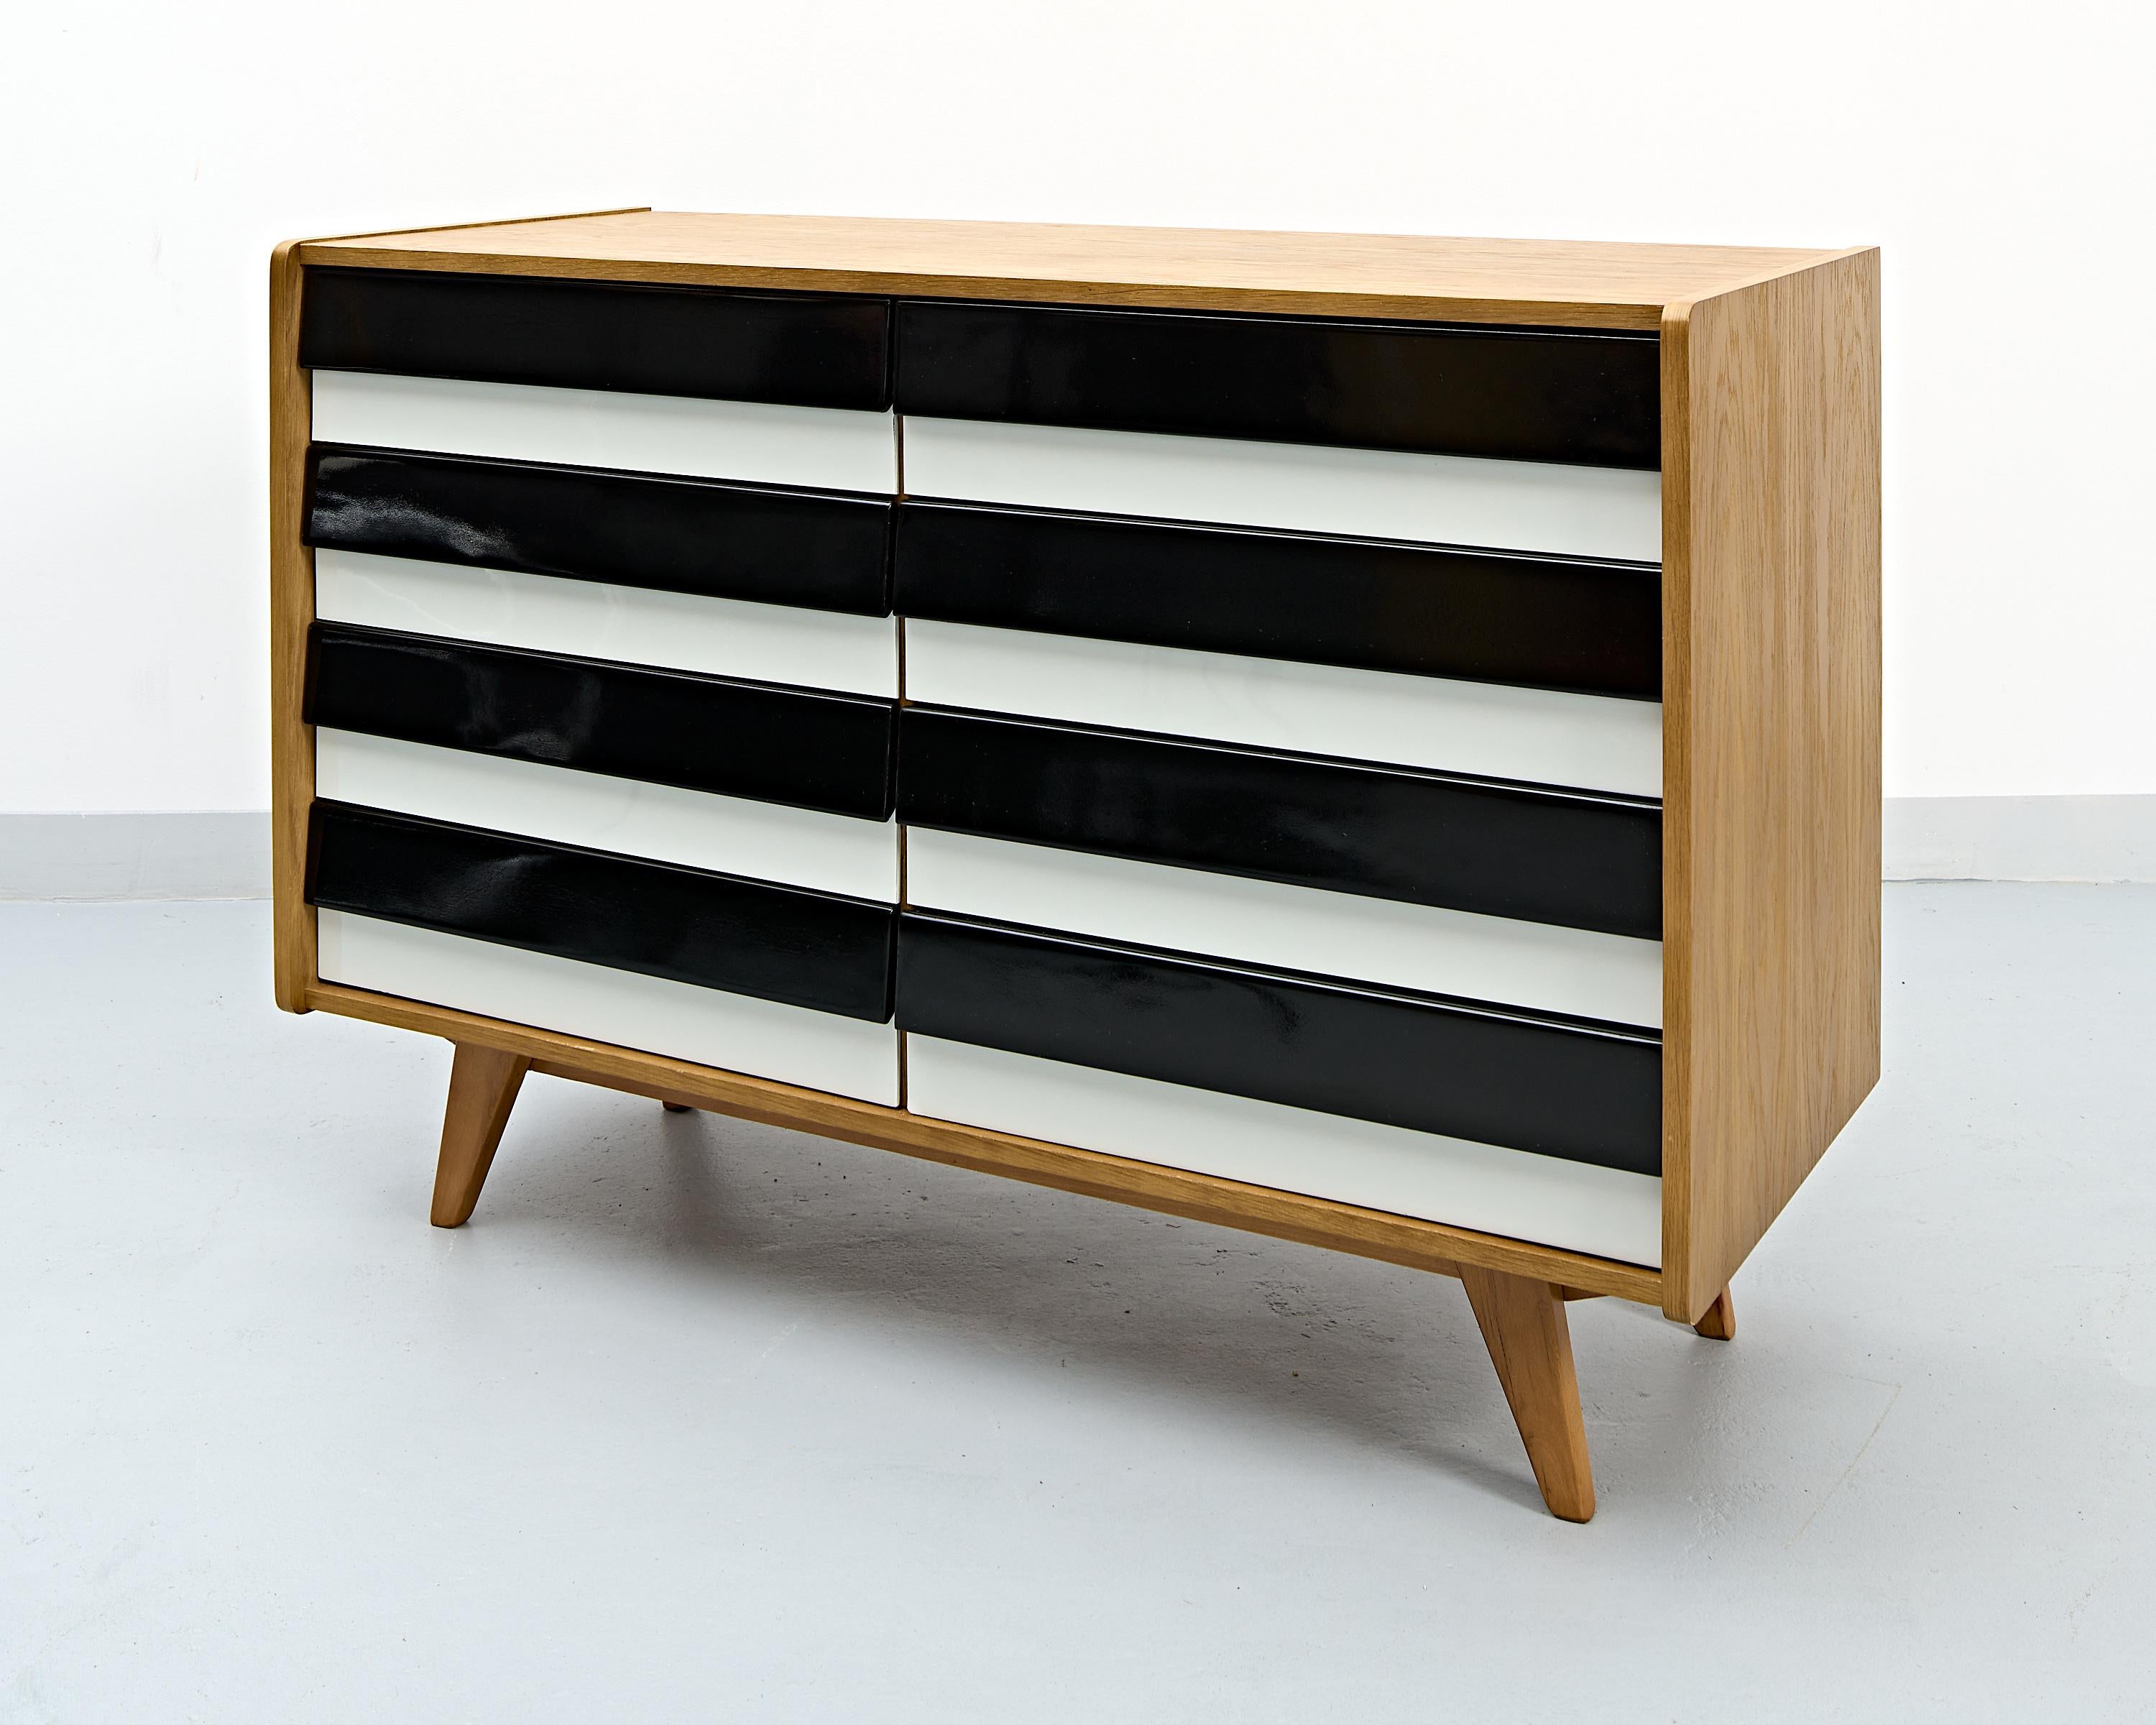 The U-453 dresser designed by the welll known former Czechoslovakian designer Jiří Jiroutek as a part of the U series. Works began after the enormous success of the czech pavilion at the Brussels ’58 expo and the series became one of the leading